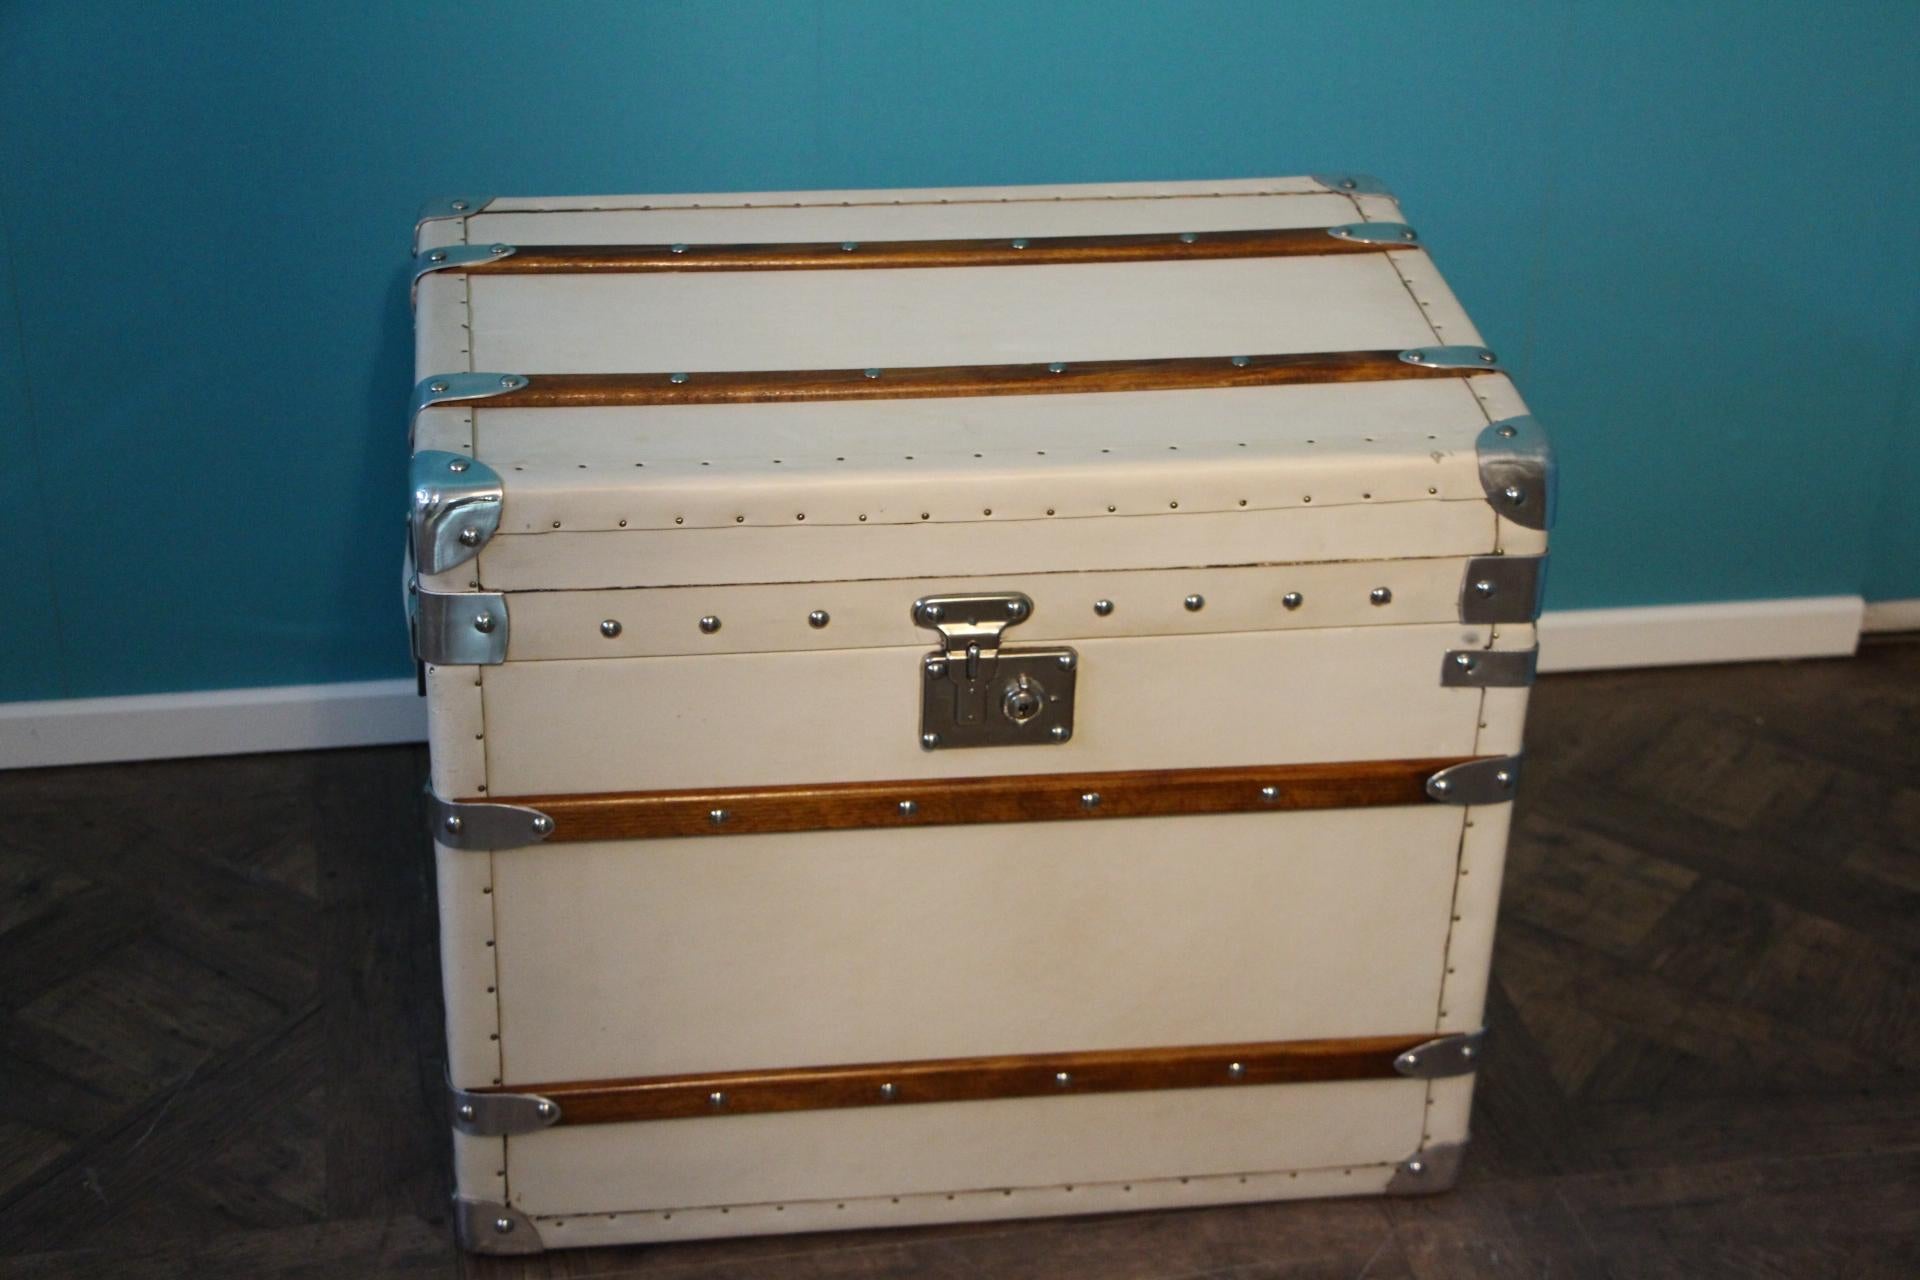 Very pretty steamer trunk made in wood and covered with white leather, wood slats, polished aluminum corners, polished steel lock and large leather side handles.
It is a very unusual color for a steamer trunk and thanks to its uncommon shape, it